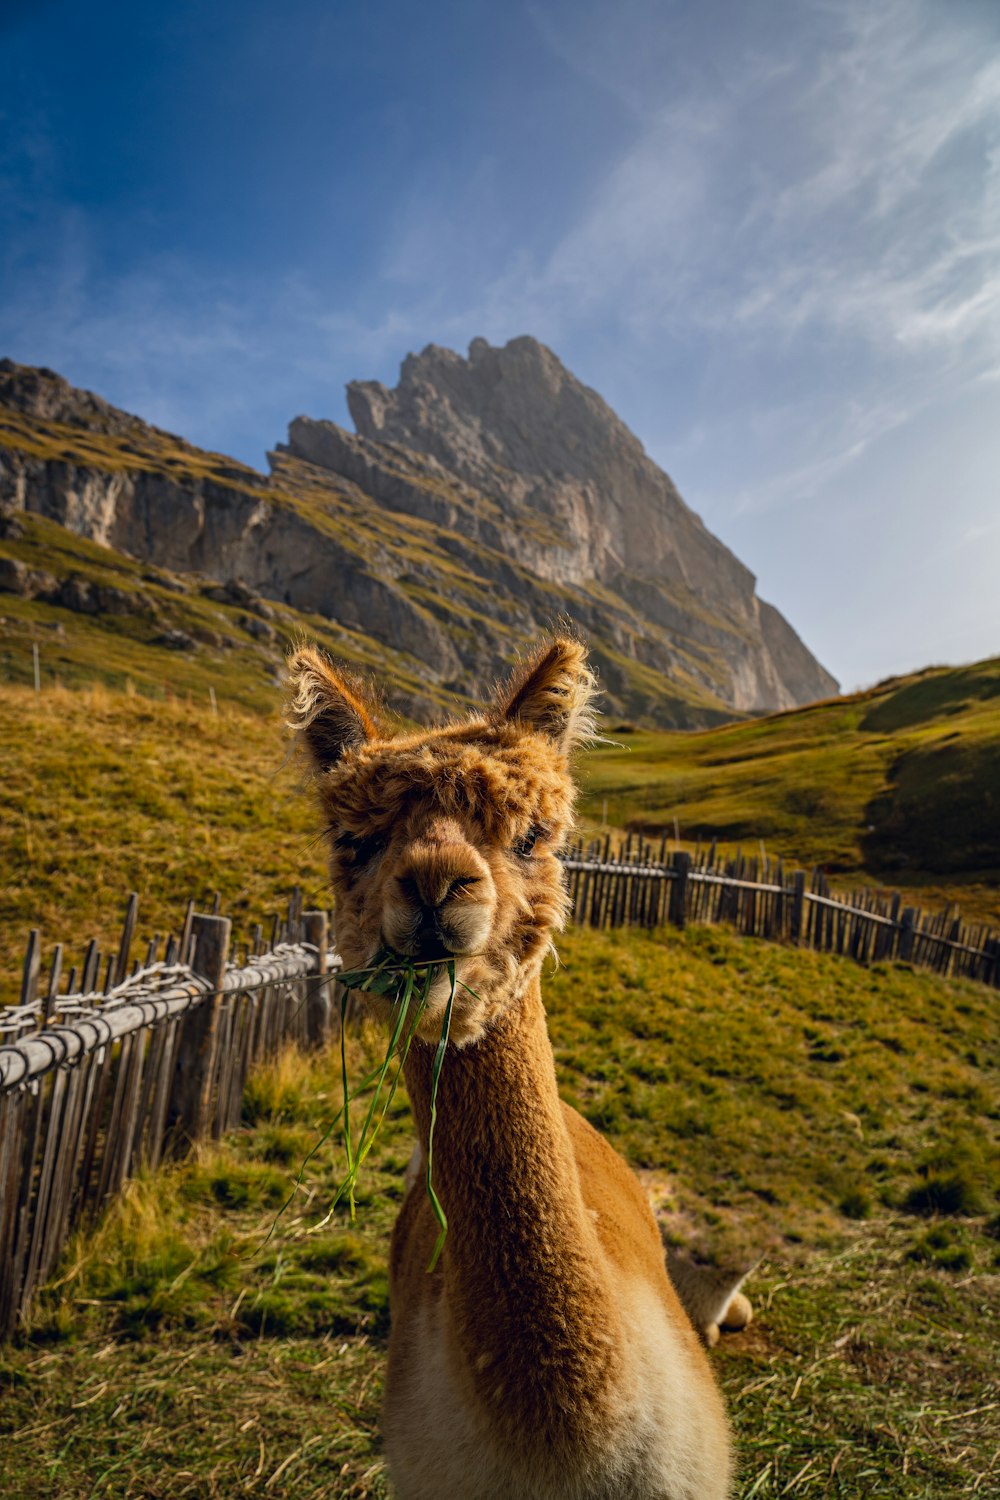 a llama eating grass in front of a mountain